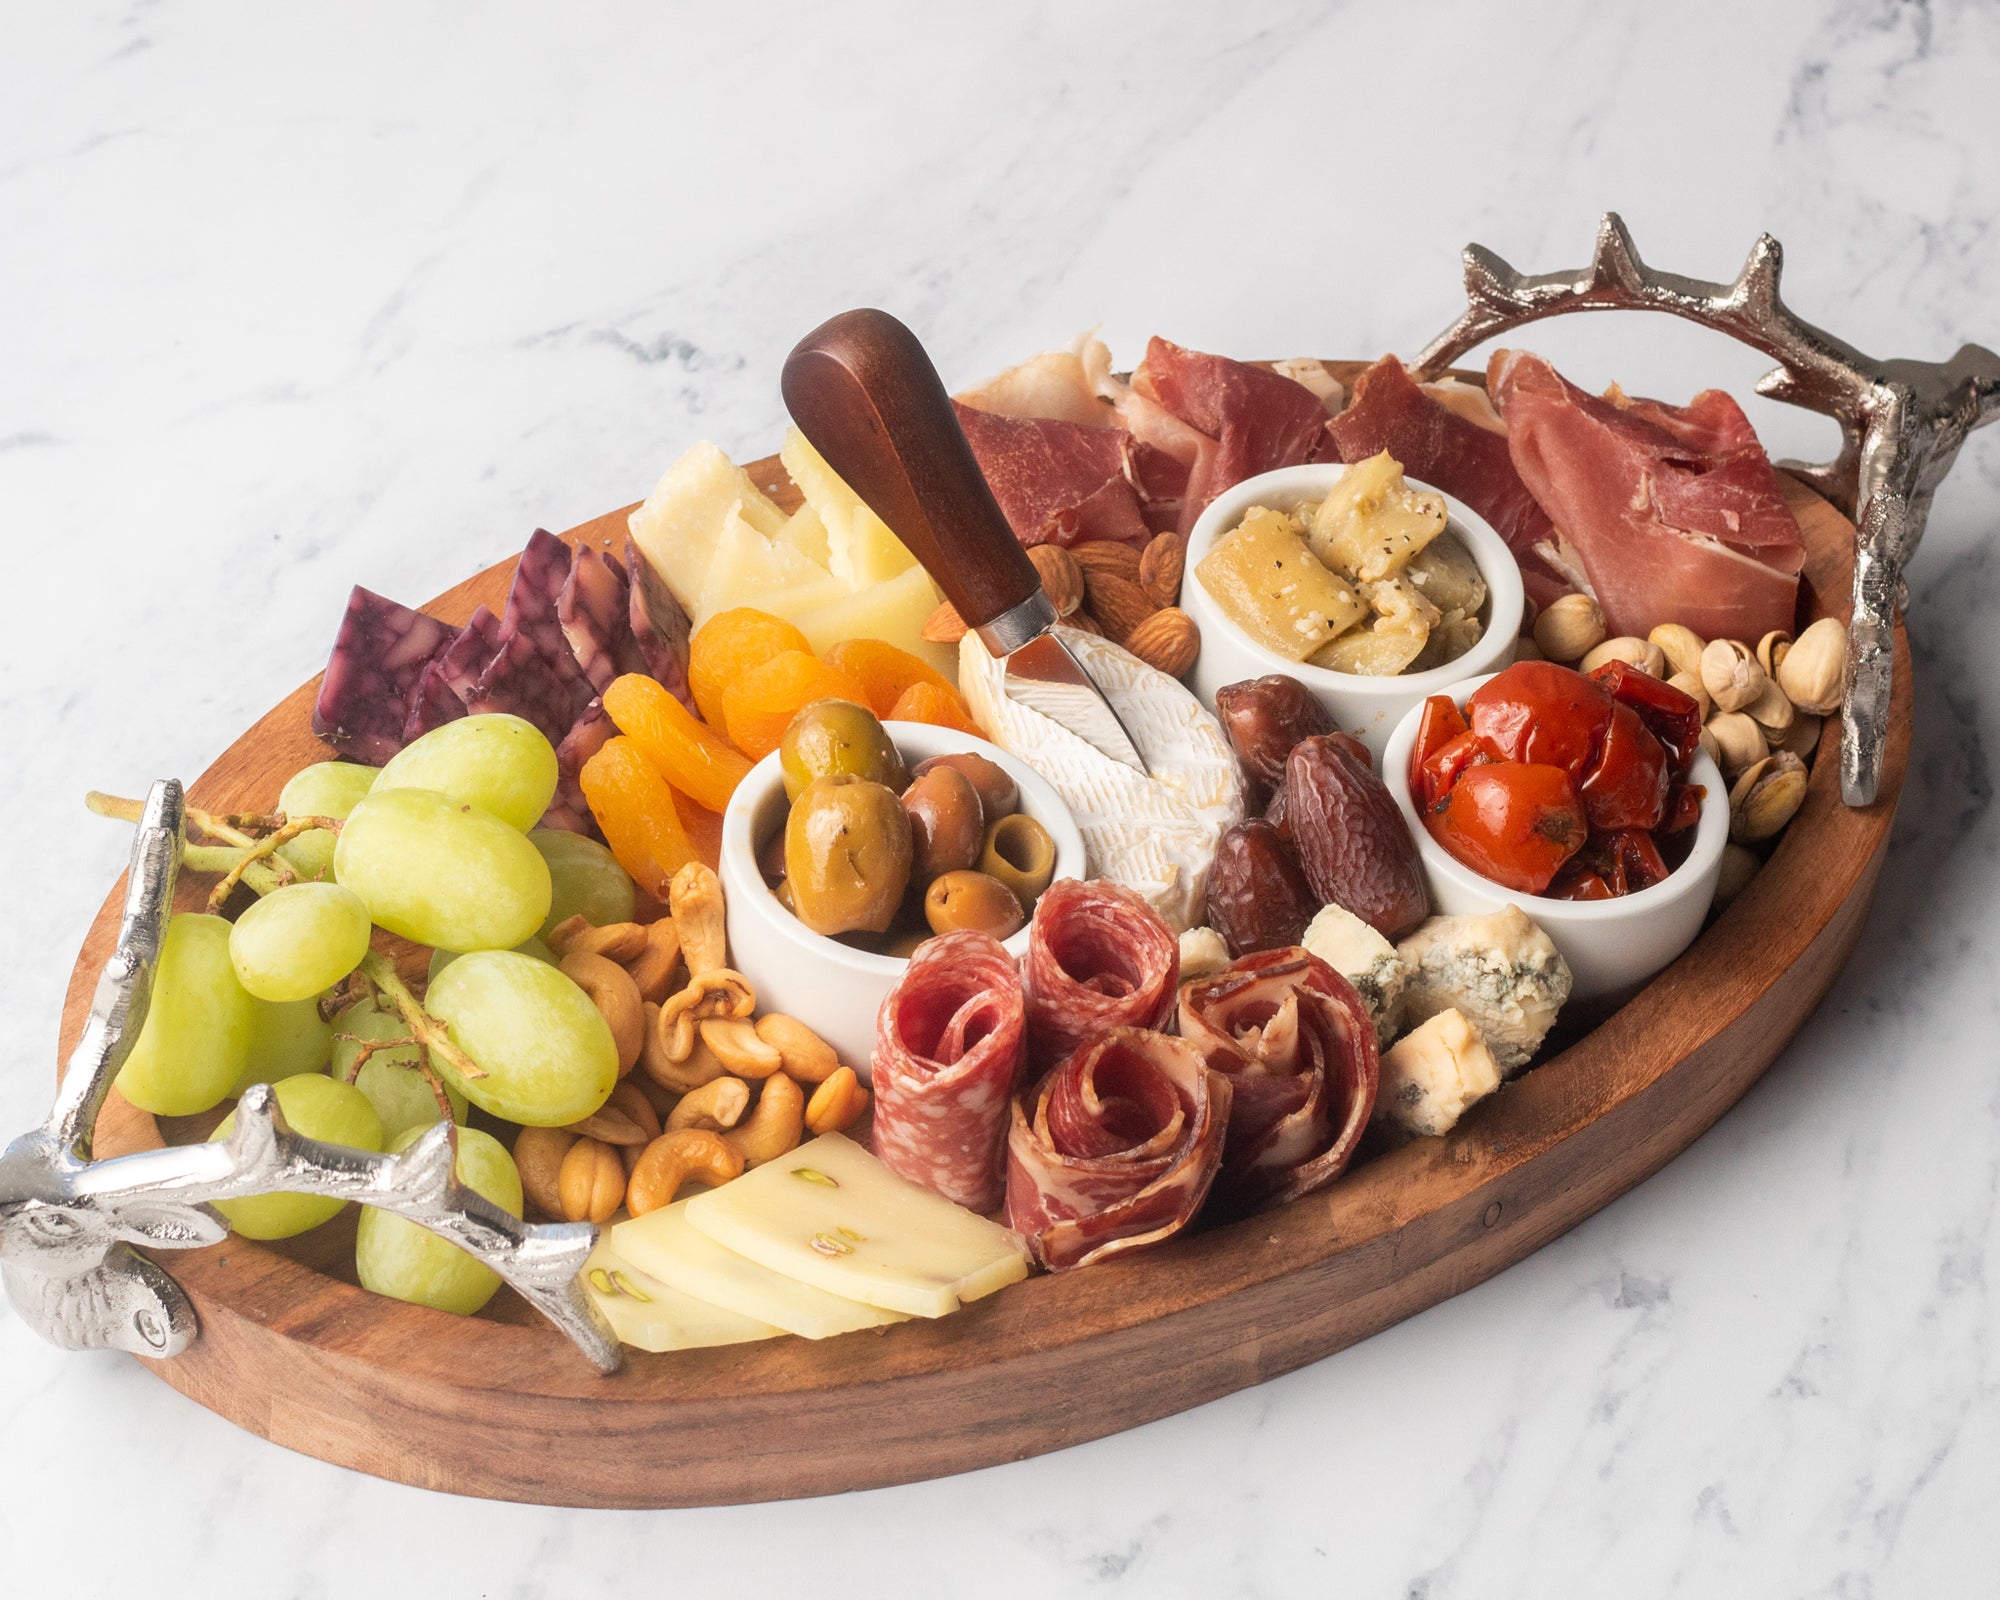 Tapas (Cheese Boards & More)